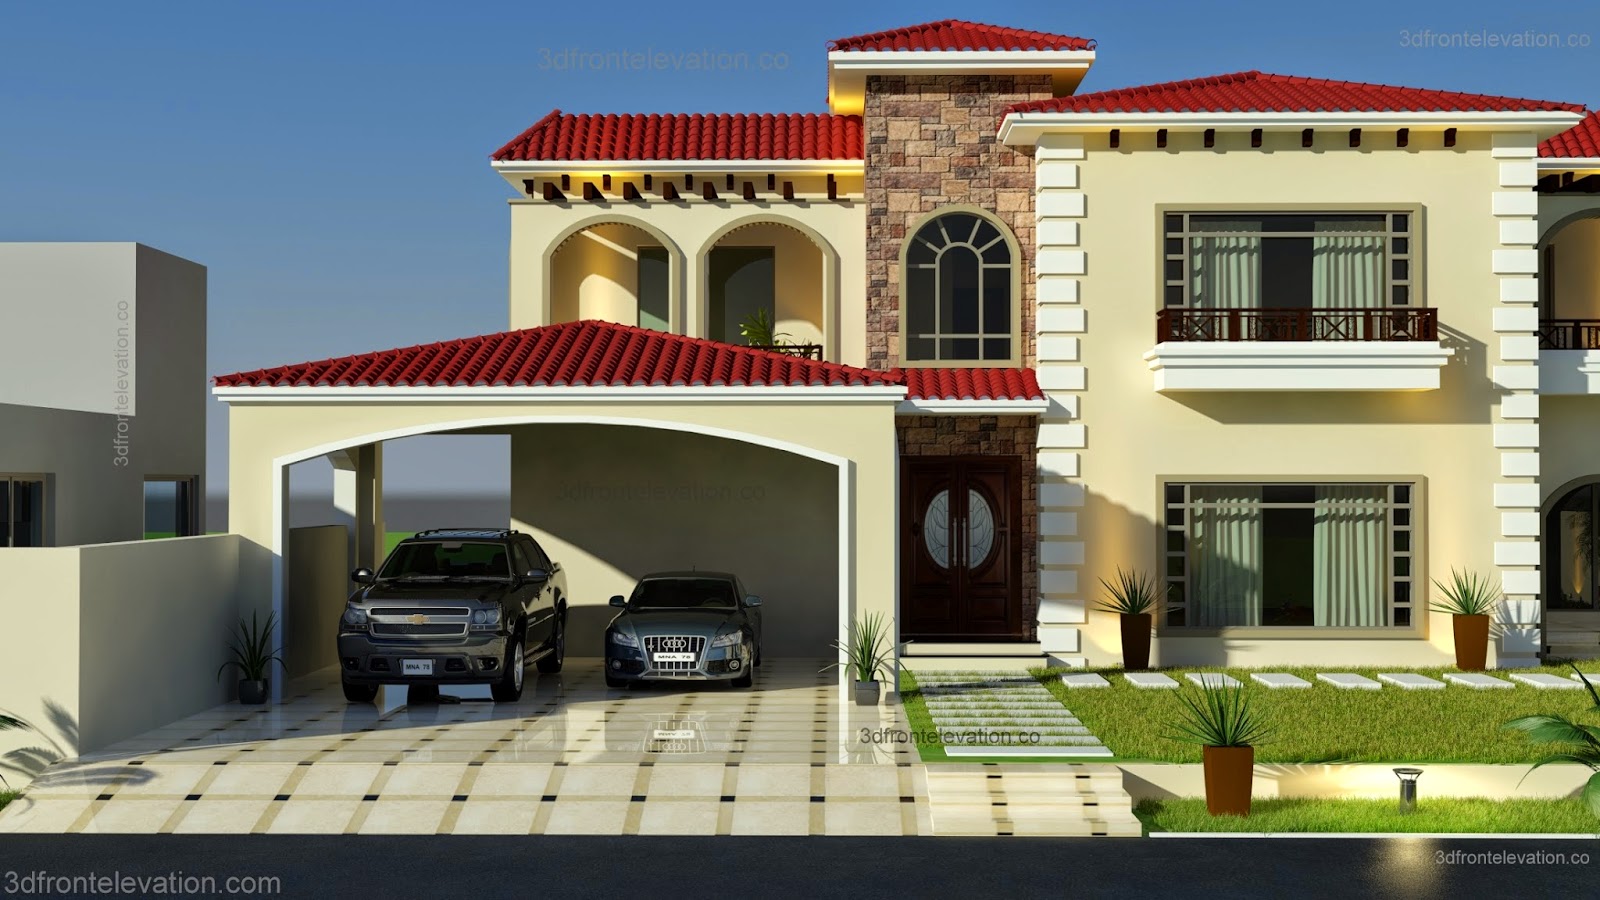 Architectural Design For Small Houses In Pakistan | Design For Home